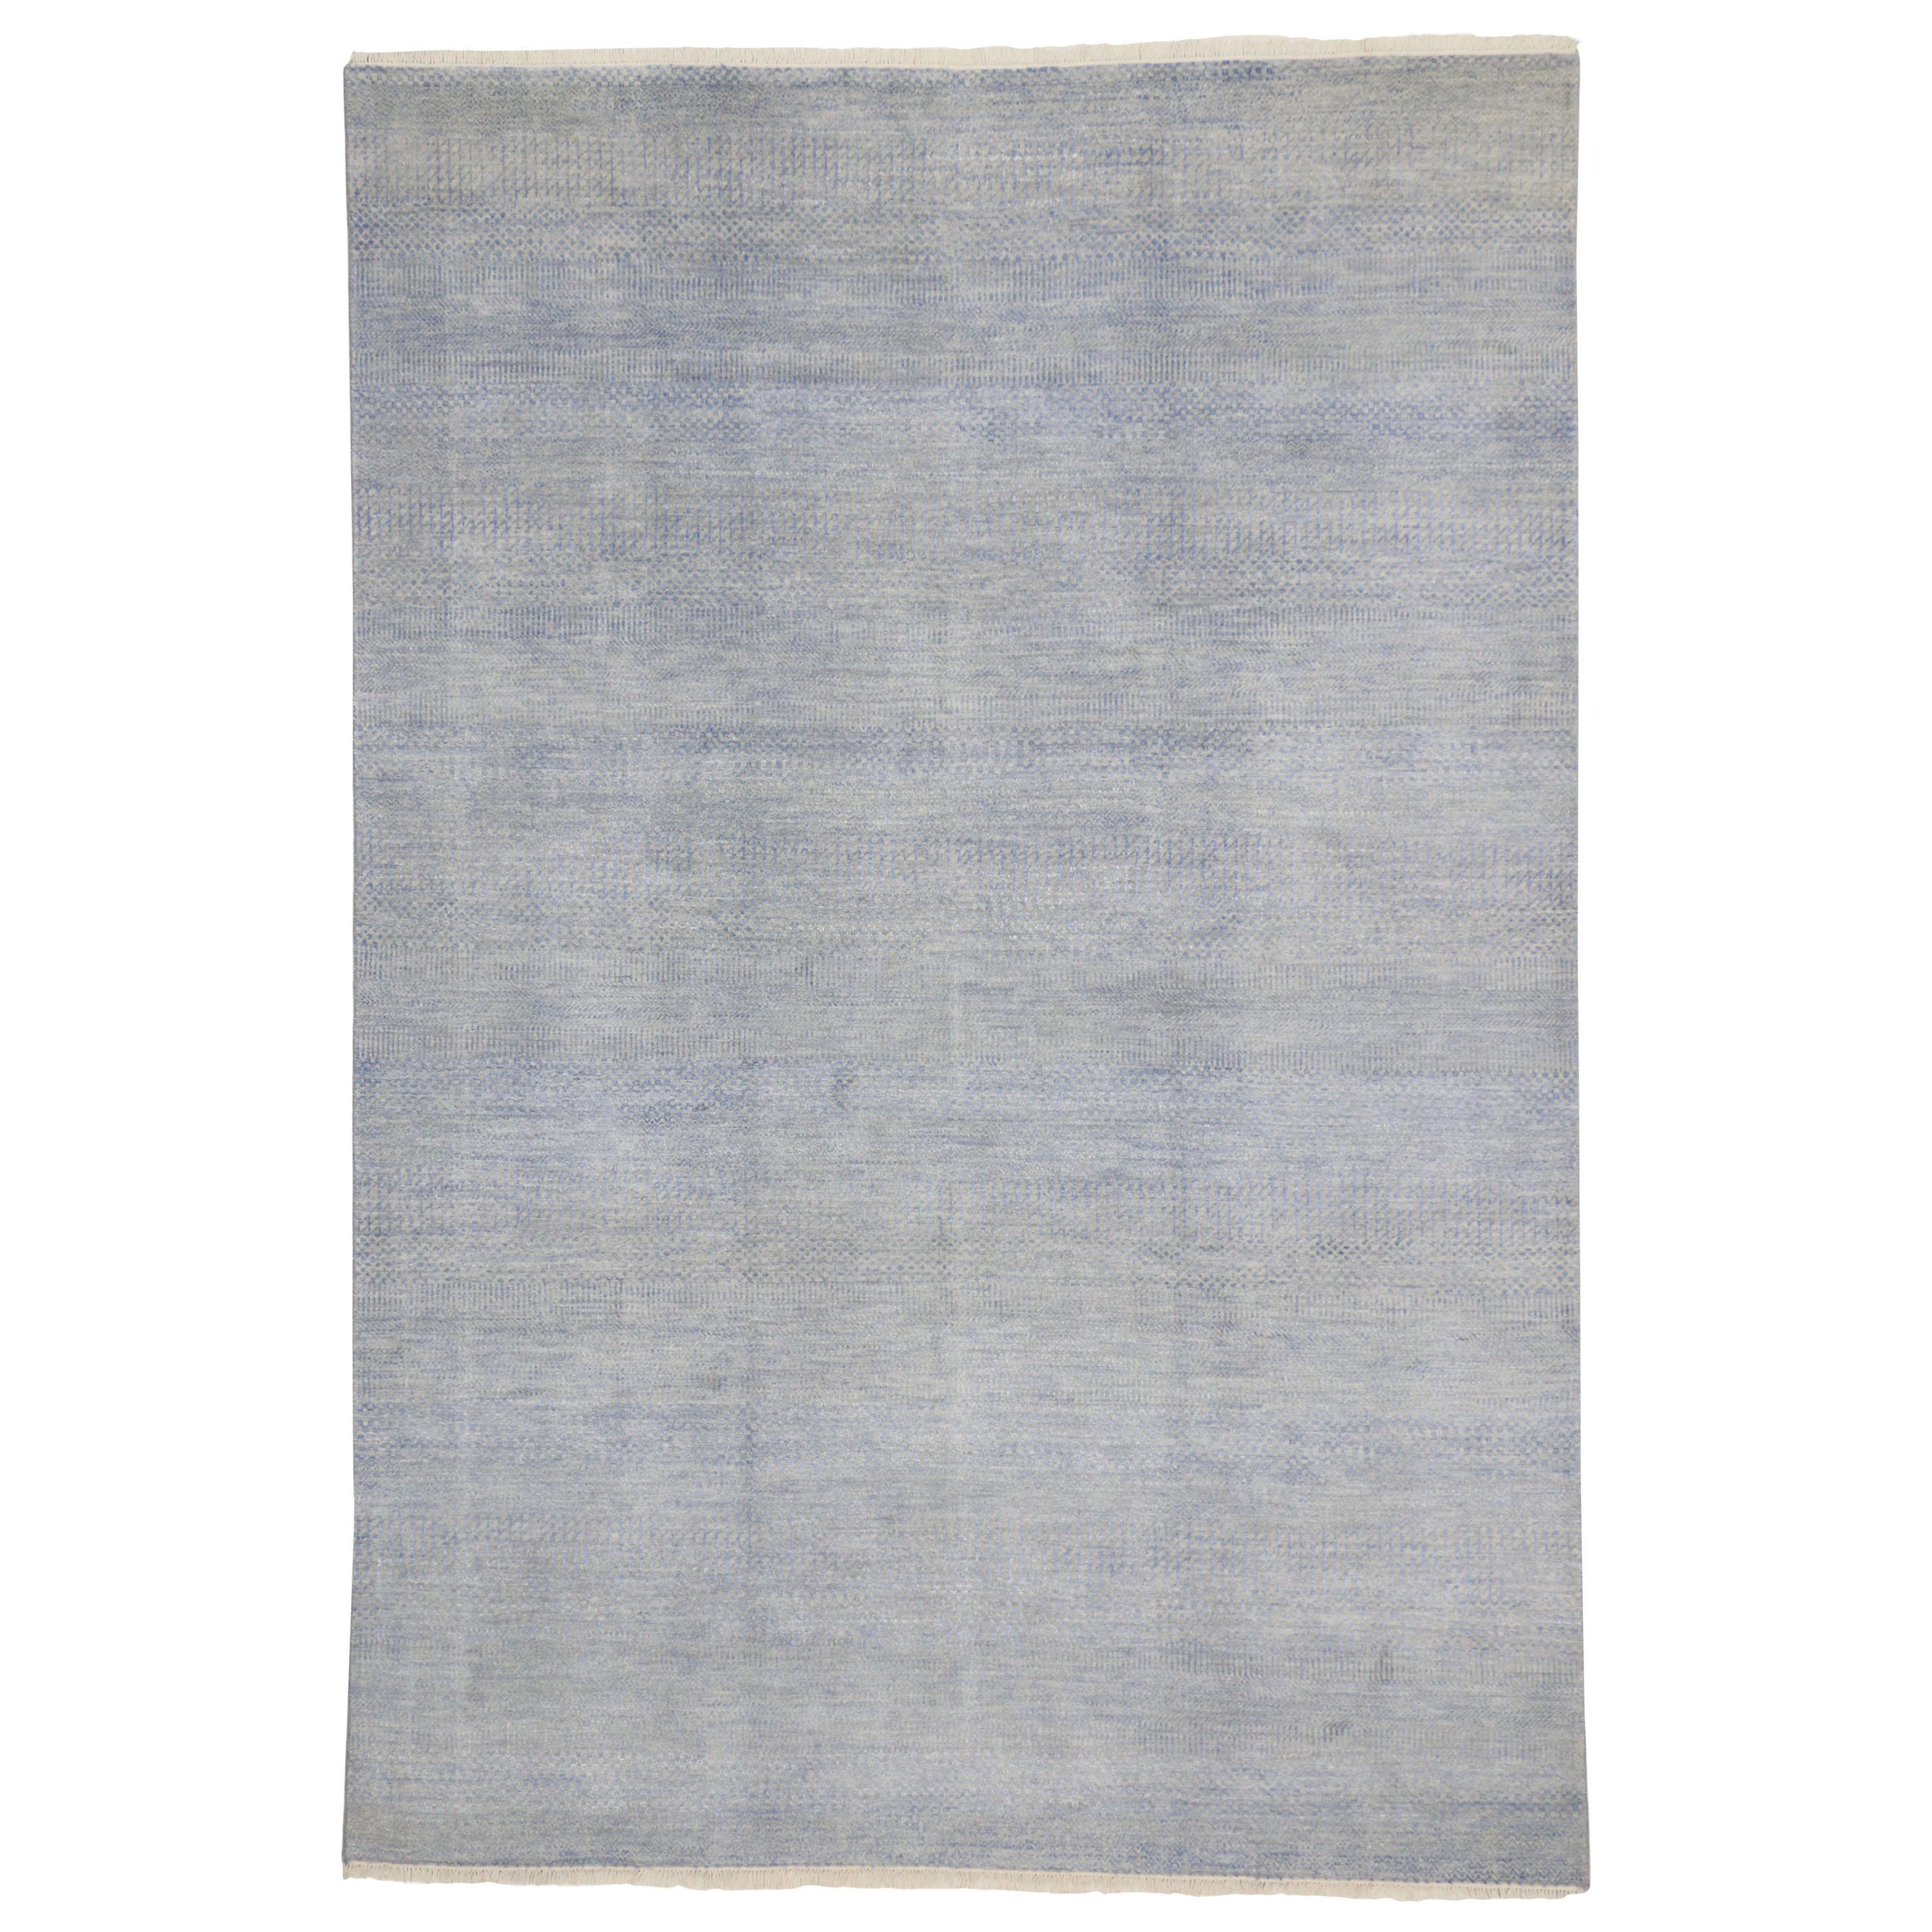 New Contemporary Transitional Area Rug with Minimalist International Style